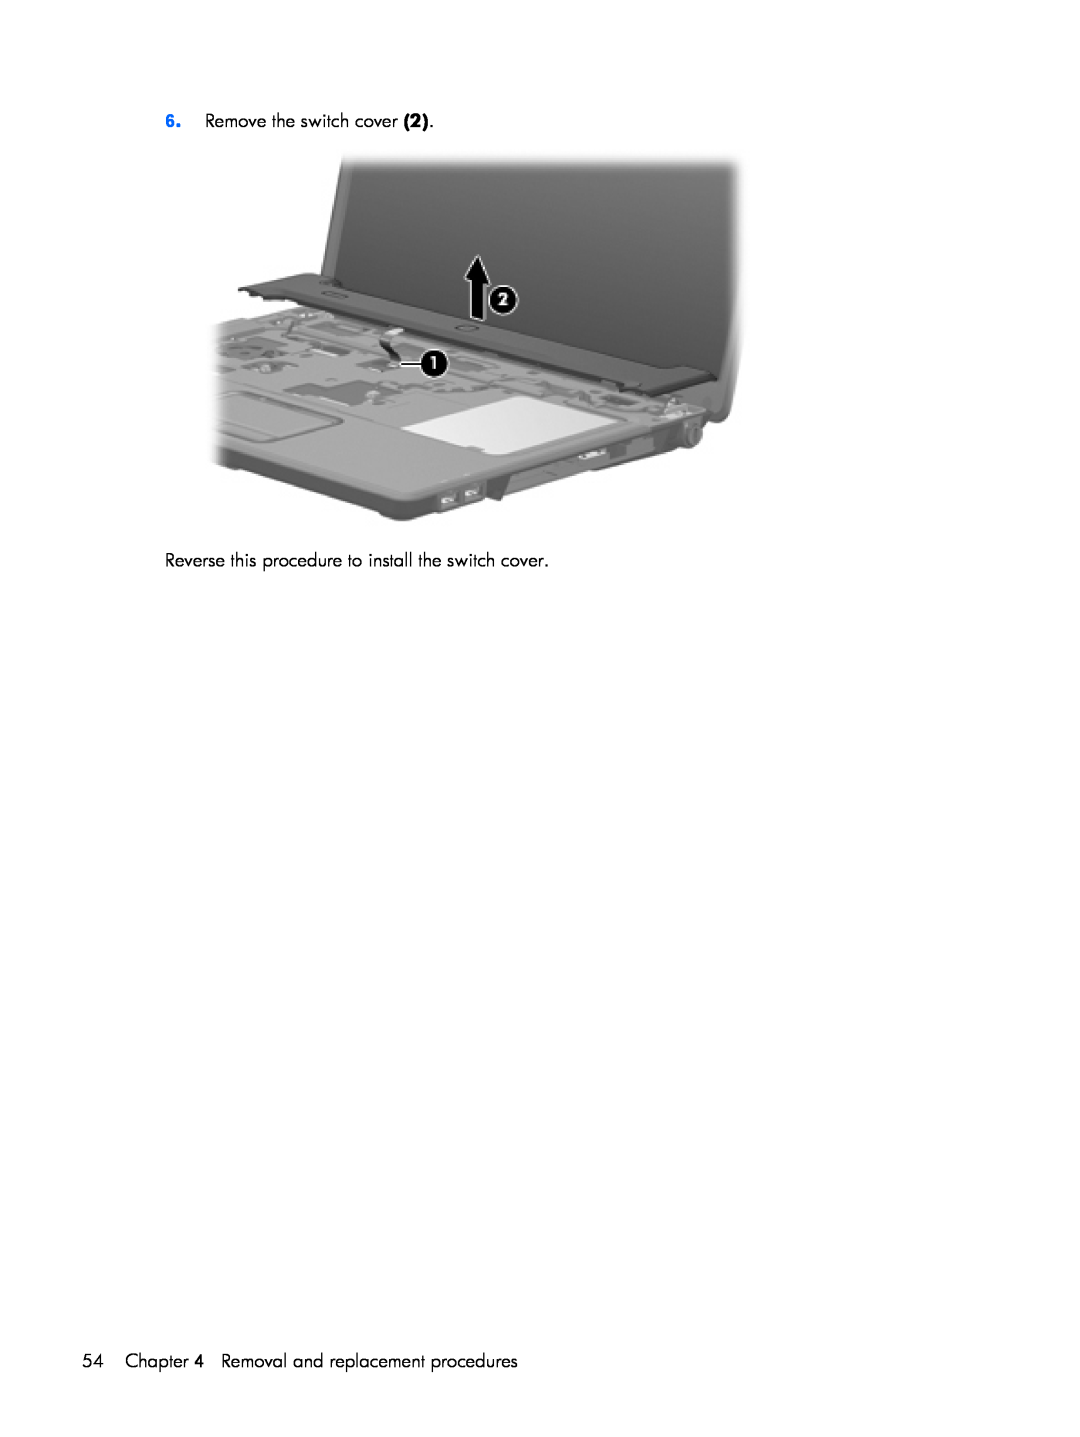 HP C762NR Remove the switch cover, Reverse this procedure to install the switch cover, Removal and replacement procedures 